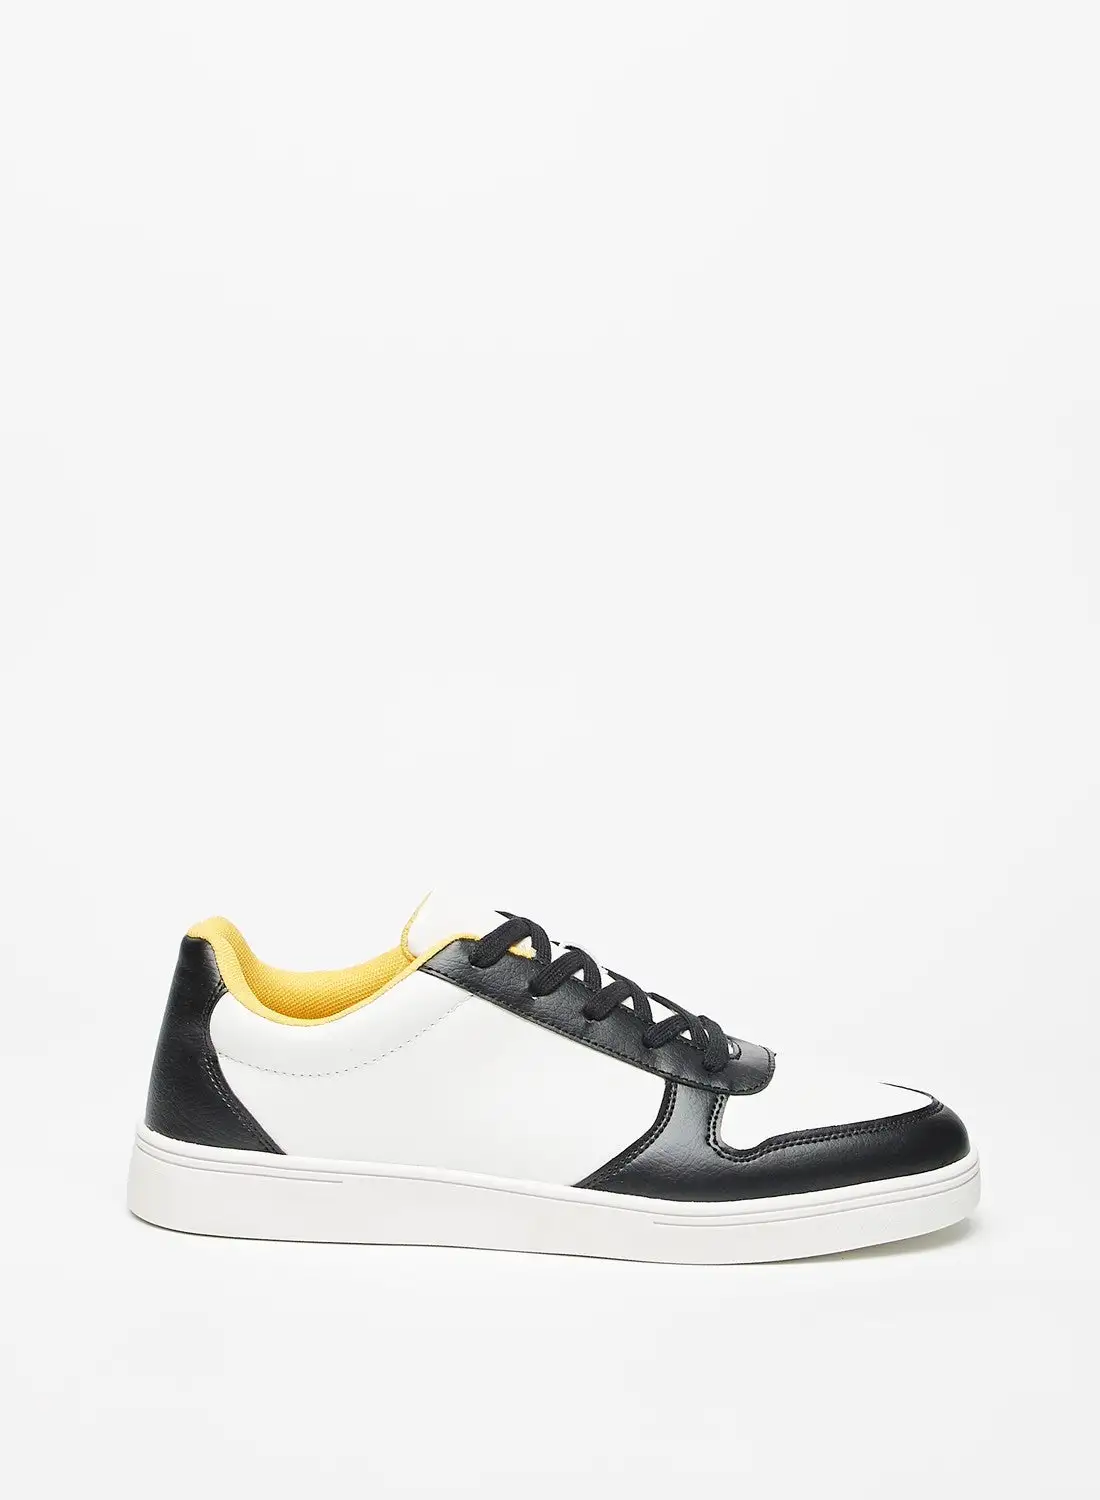 shoexpress Mens Panelled Sneakers with Lace Up Closure